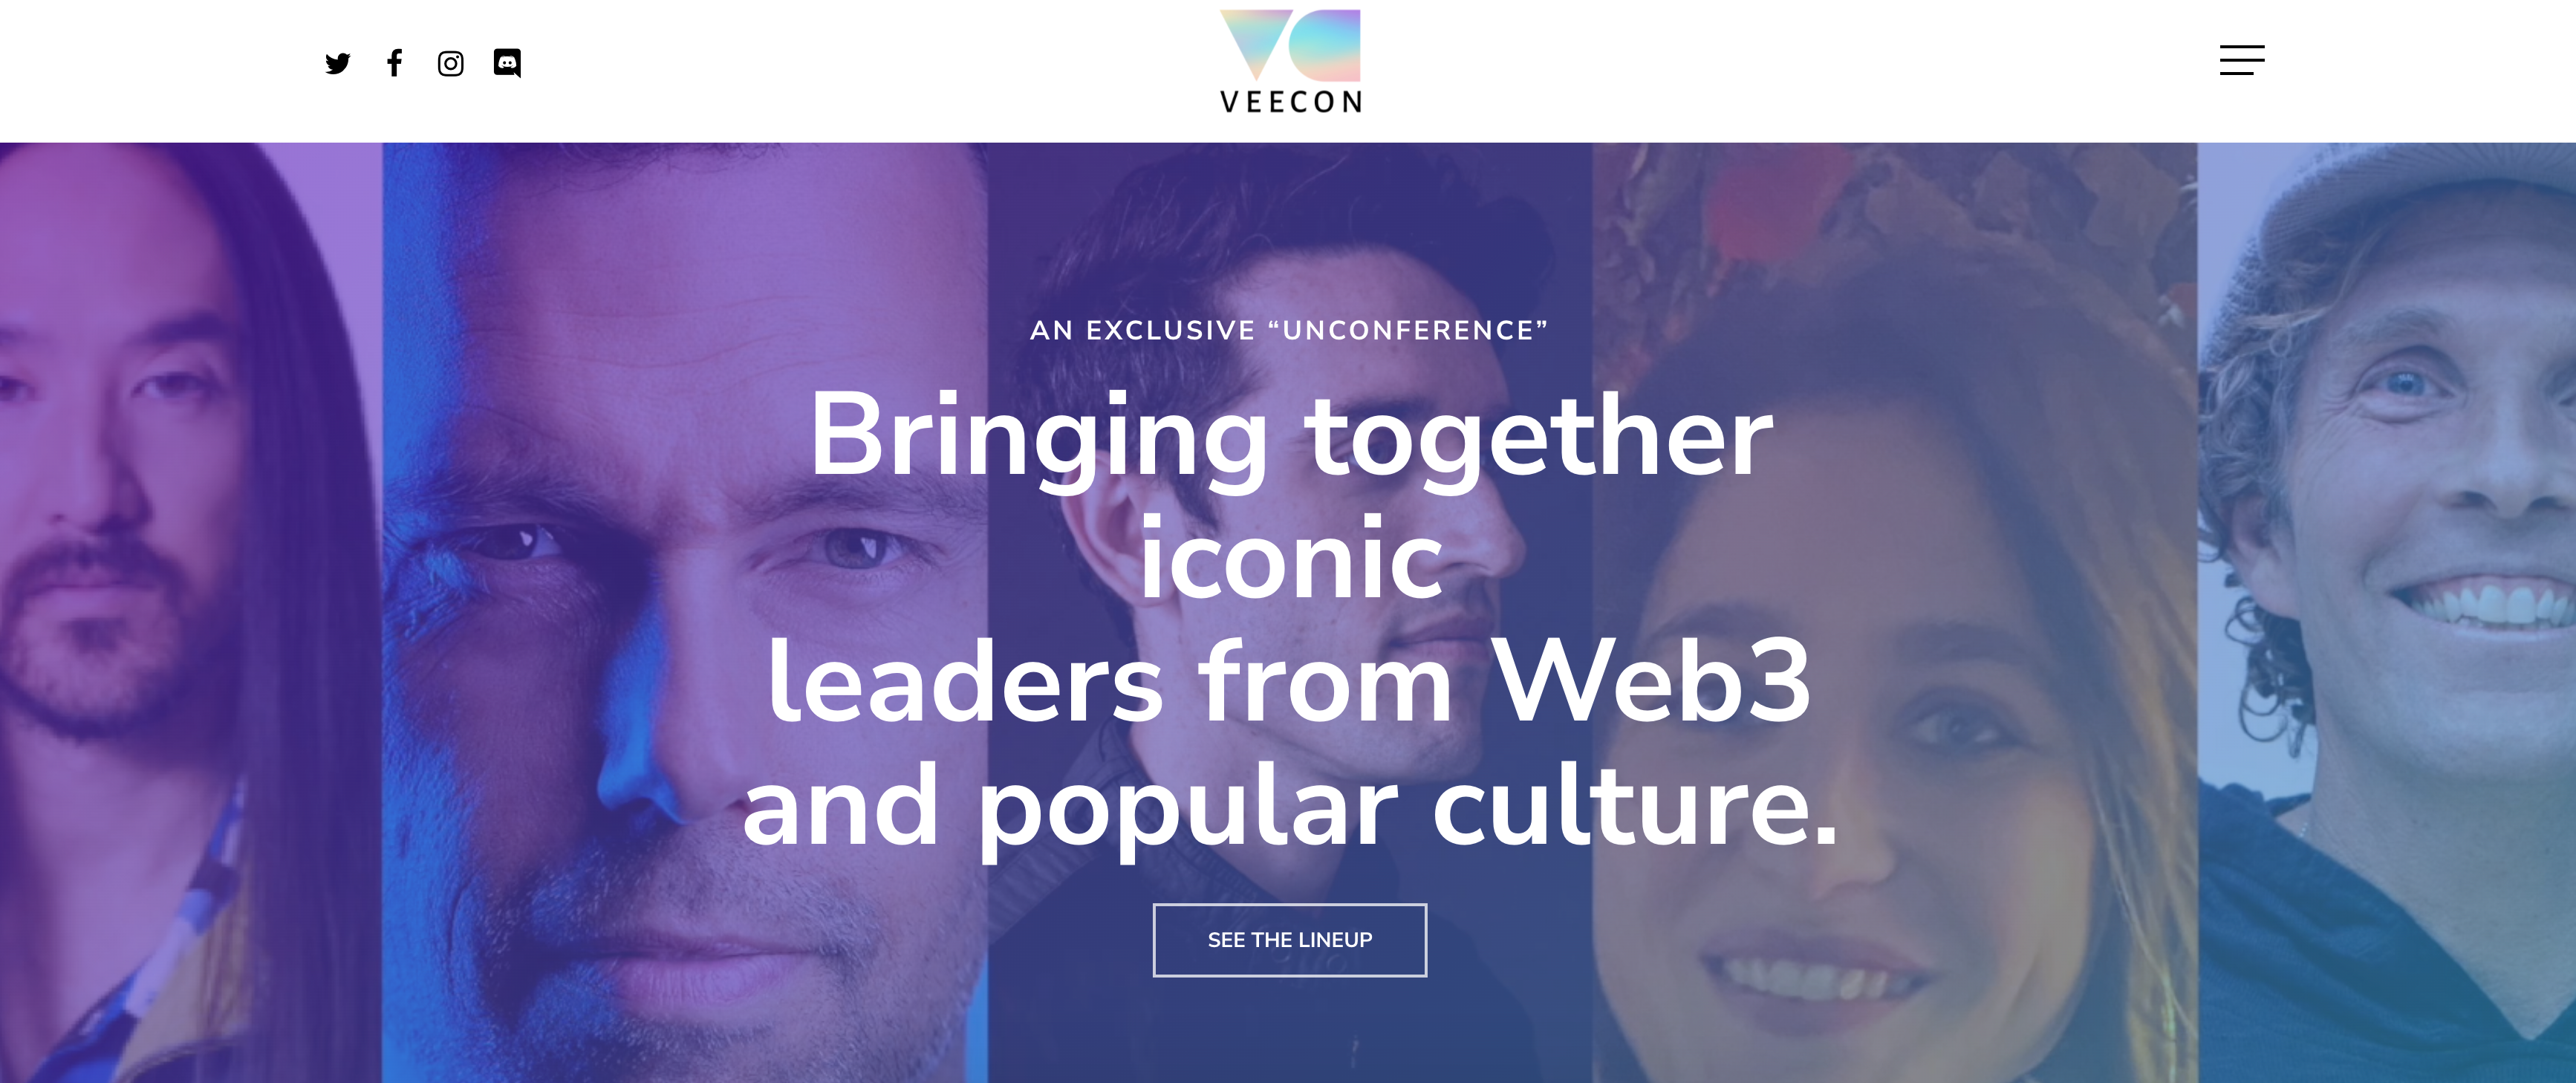 VeeCon, described as “a first of its kind NFT ticketed conference for the Web3 community to come together and build lasting friendships, share ideas, and learn together.”